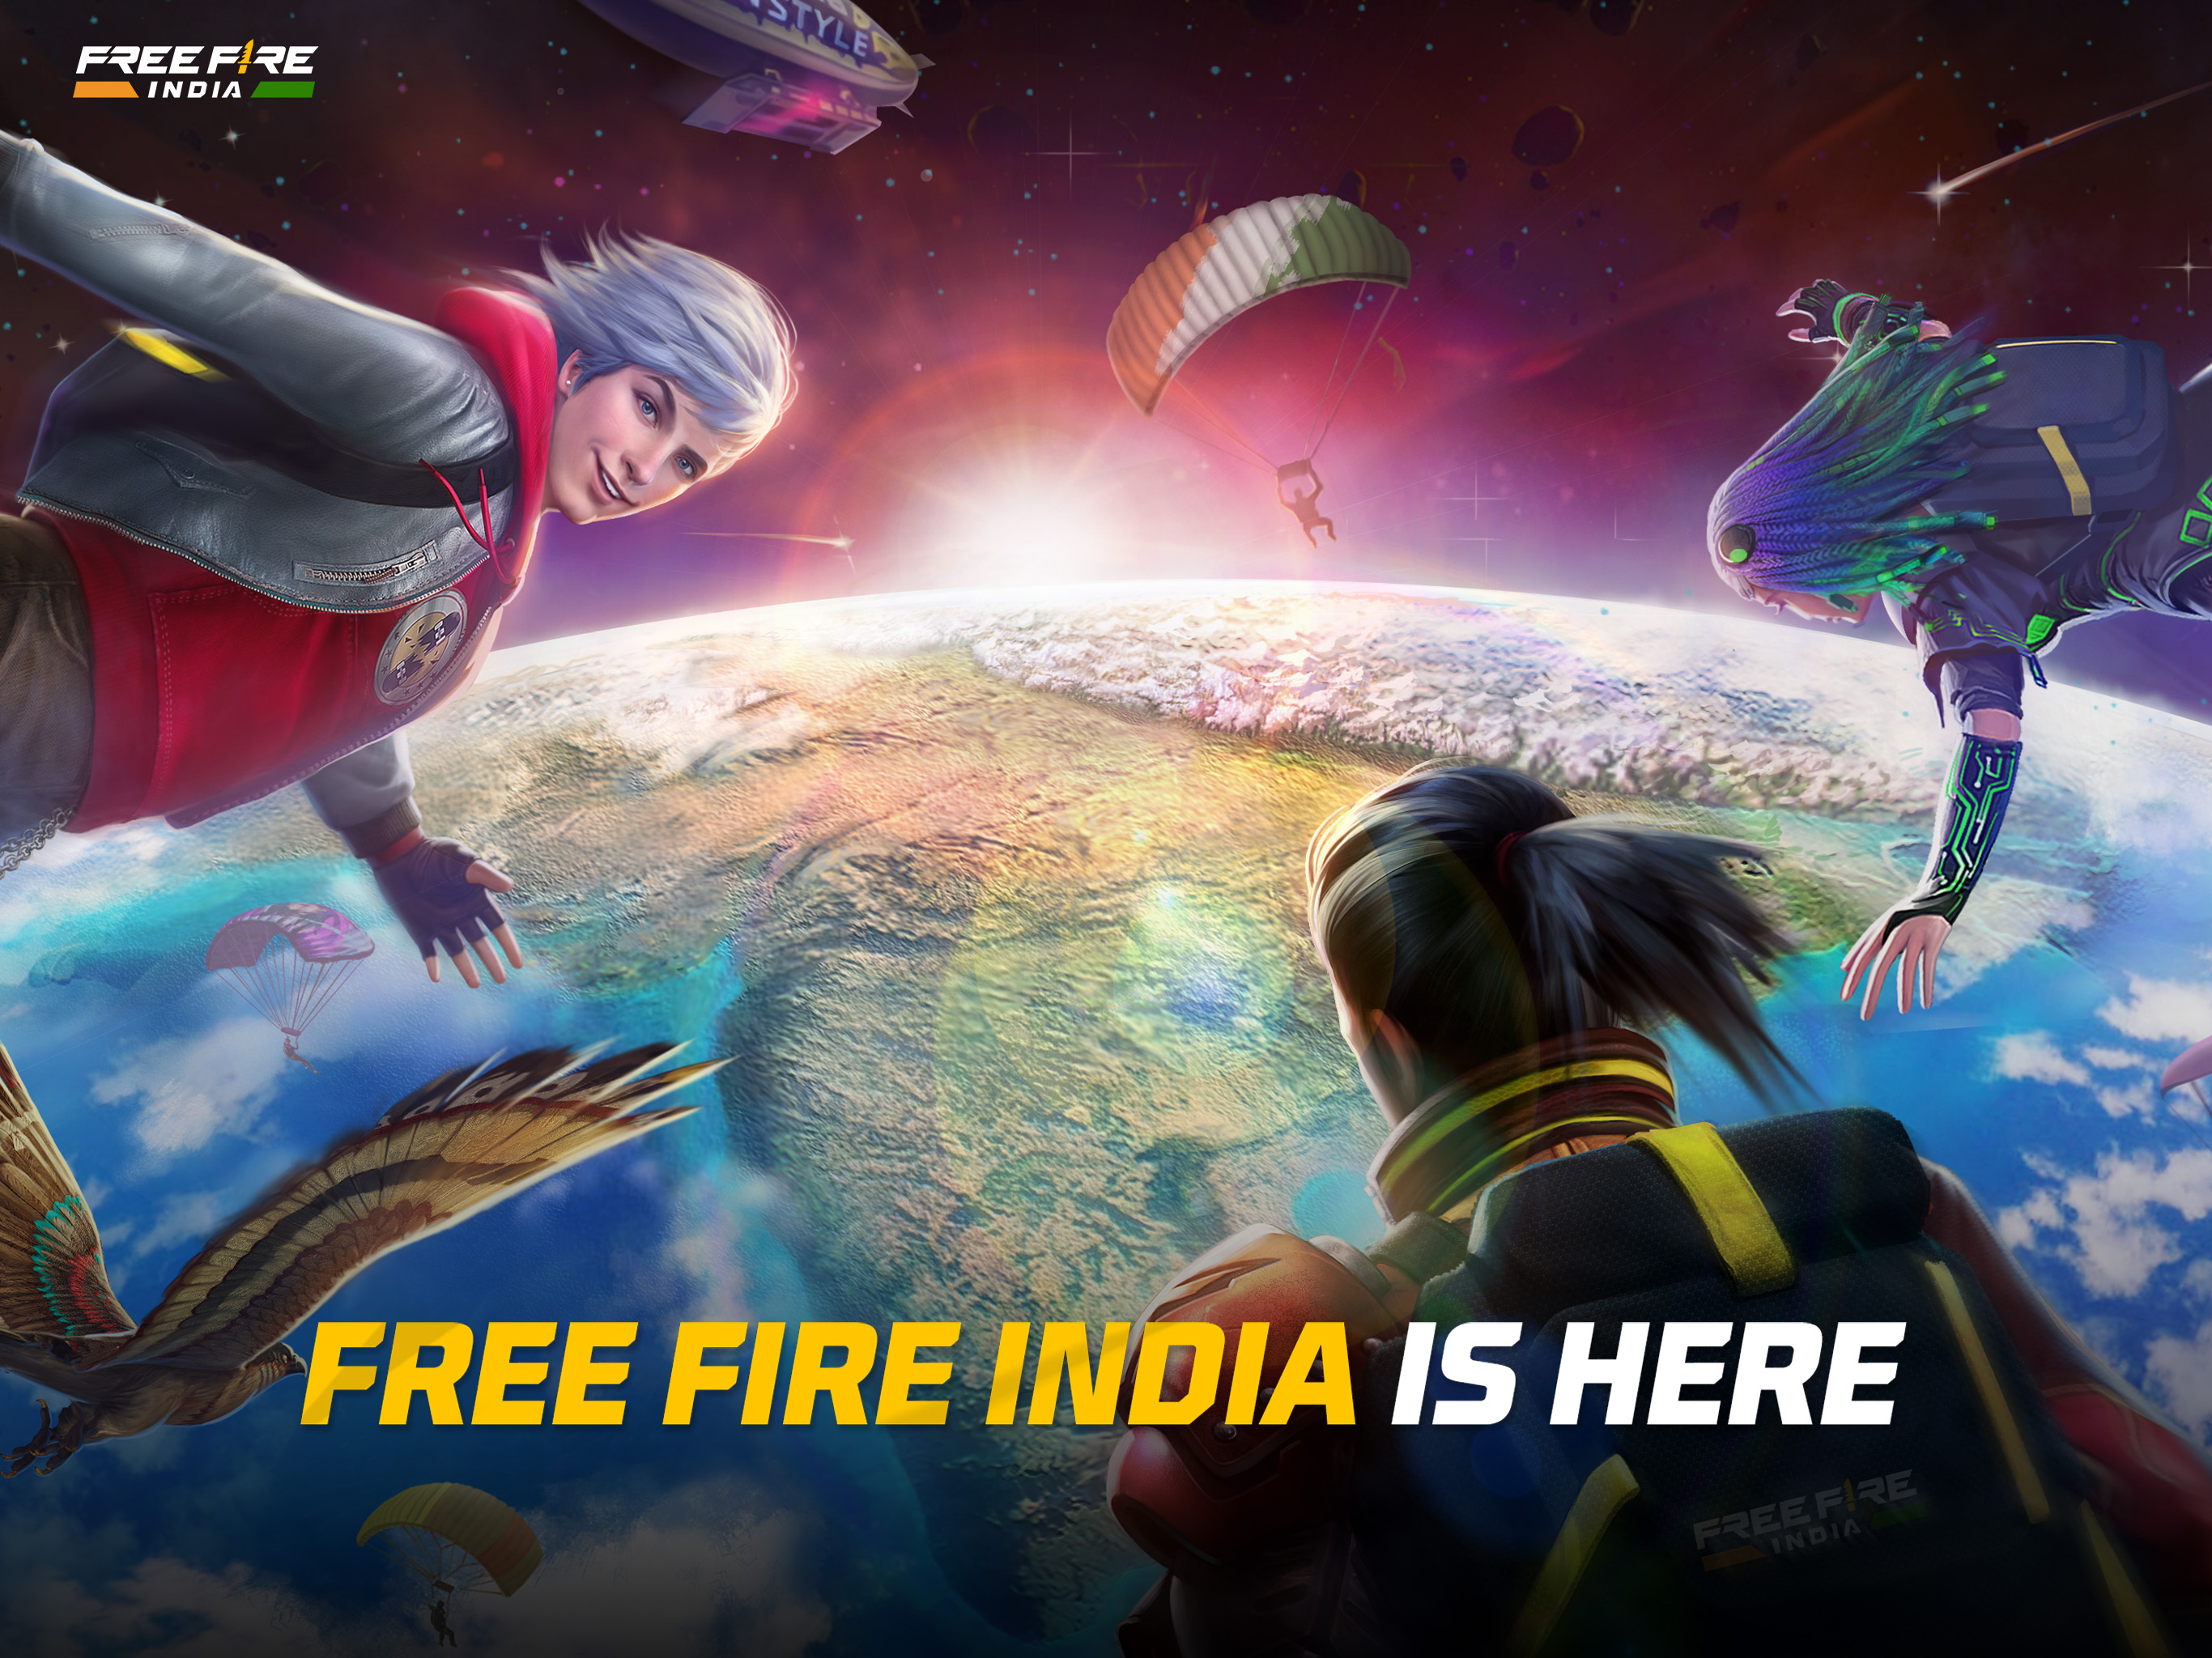 Garena Free Fire - Outmatch the Competition with BlueStacks